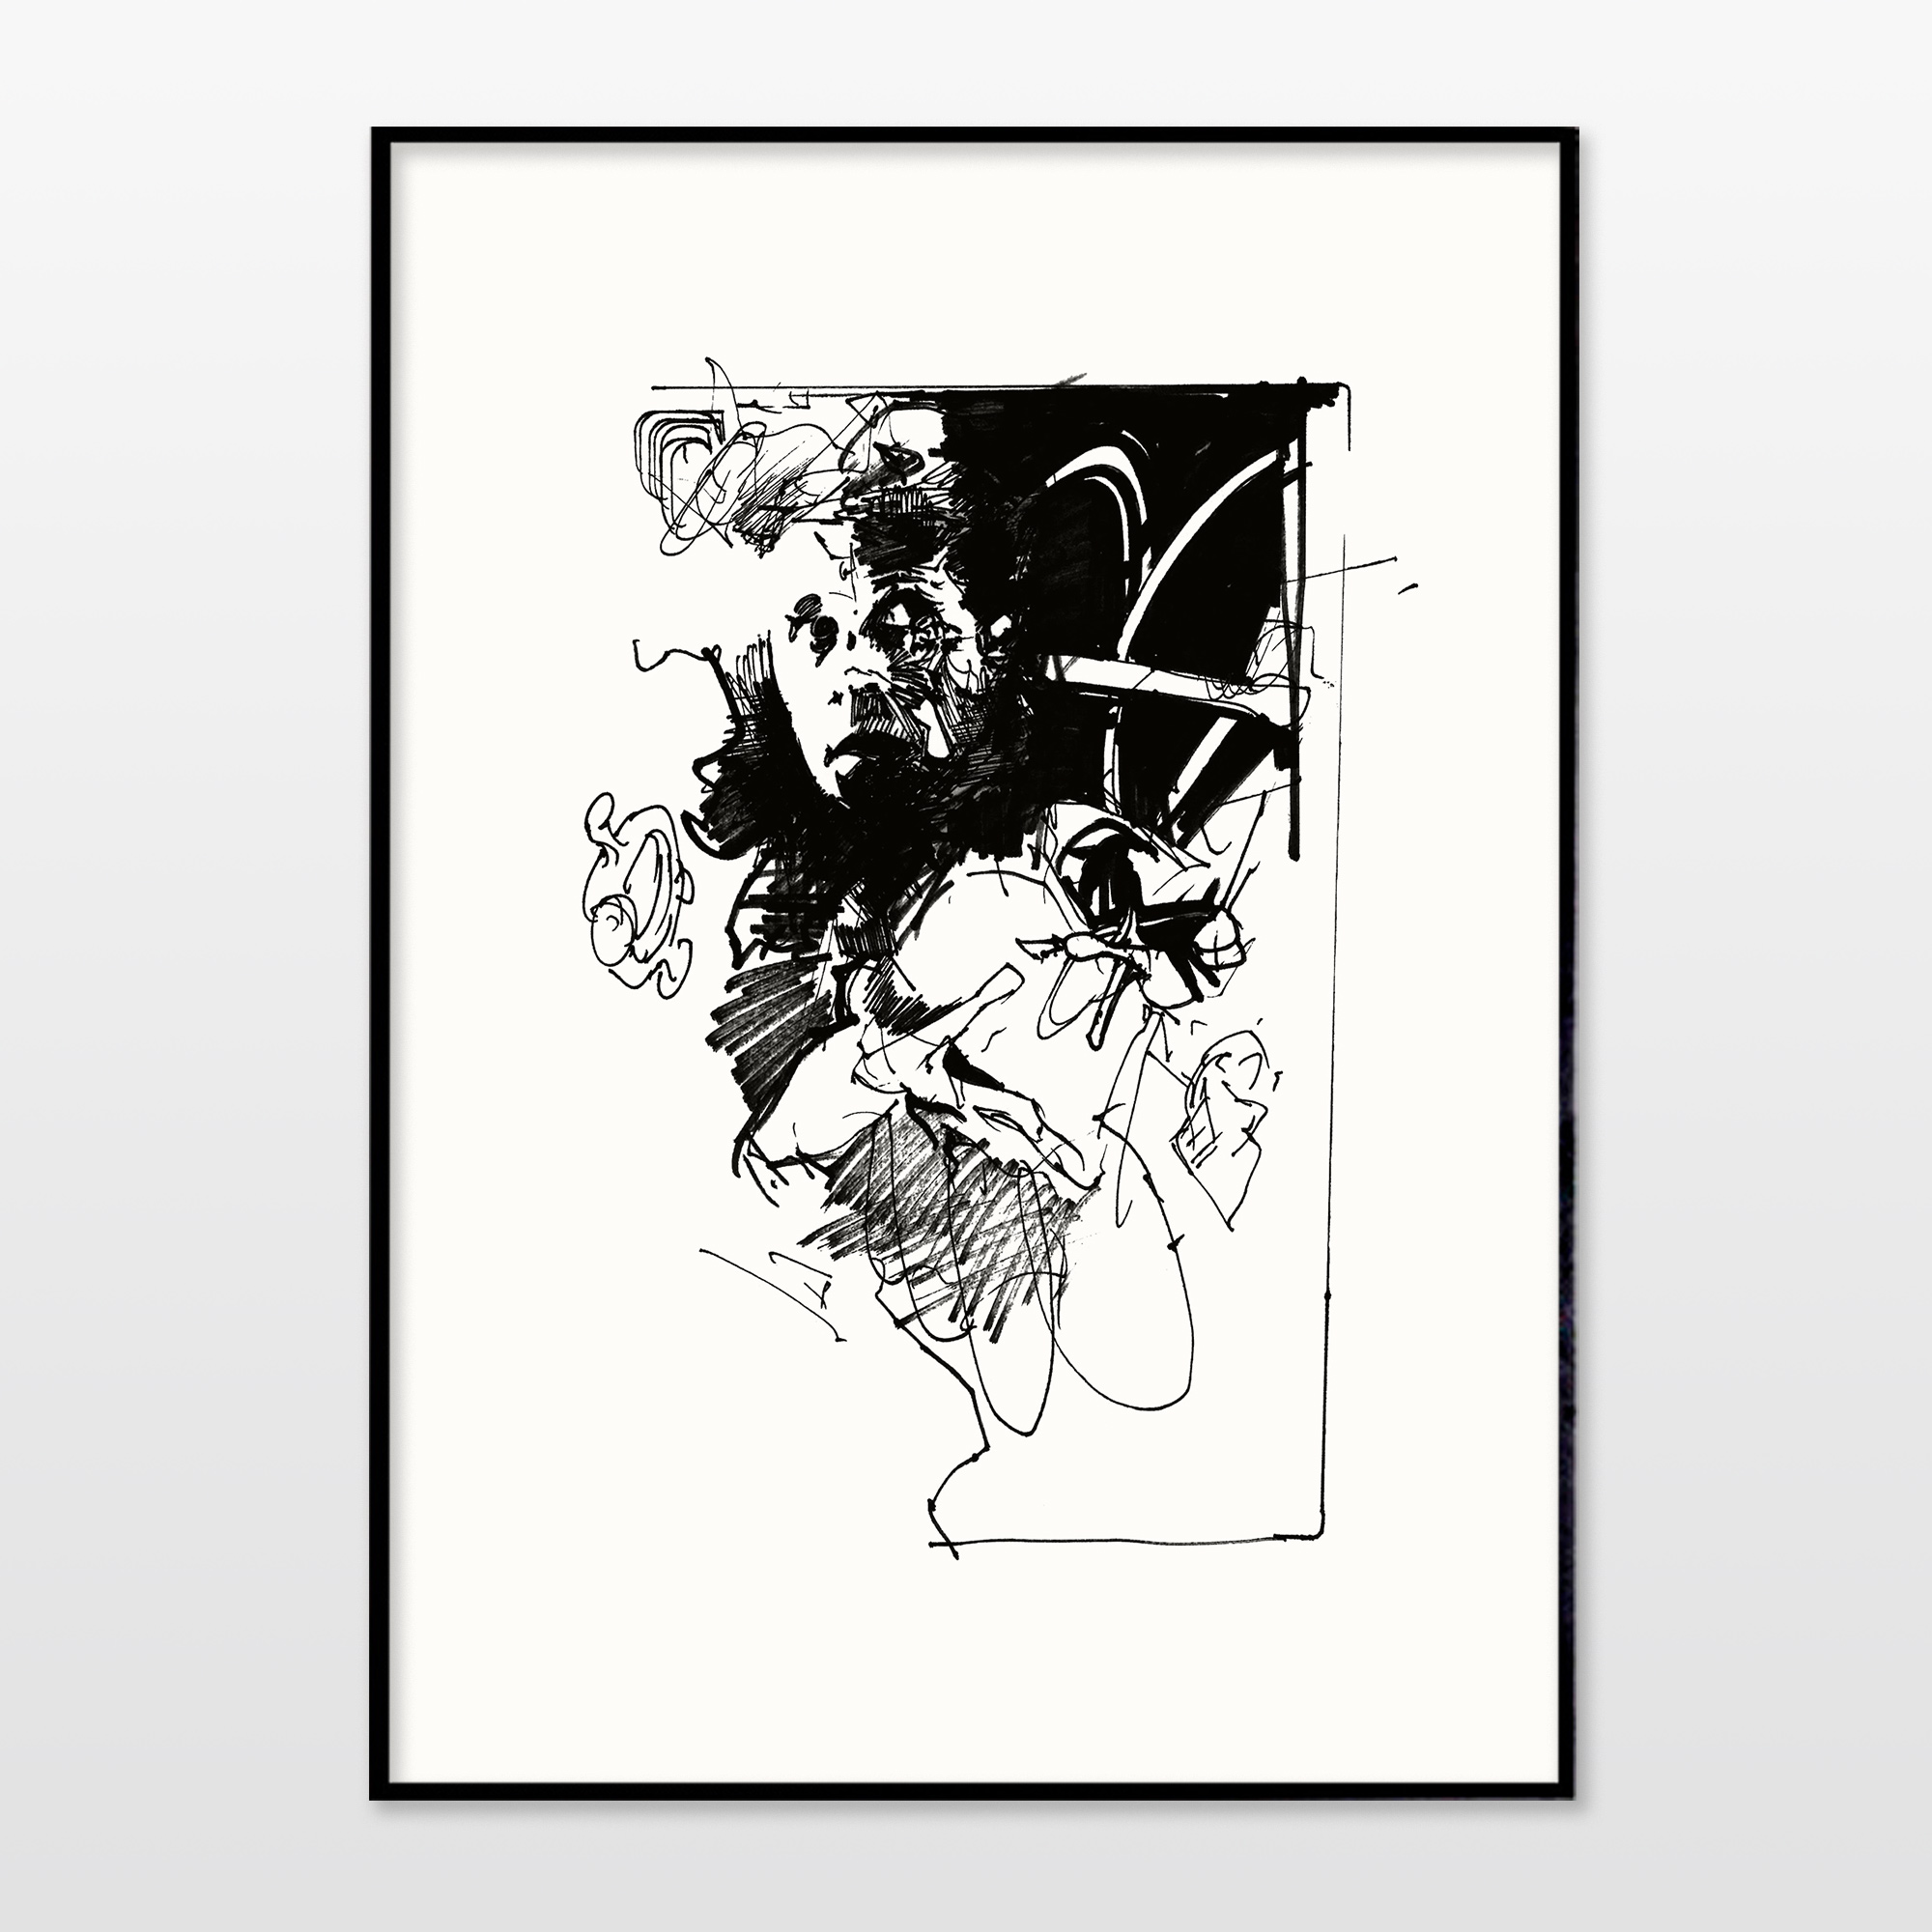 posters-prints, giclee-print, abstract, expressive, figurative, portraiture, patterns, people, black, white, ink, paper, black-and-white, contemporary-art, danish, decorative, design, expressionism, faces, interior, interior-design, modern, modern-art, nordic, posters, prints, scandinavien, Buy original high quality art. Paintings, drawings, limited edition prints & posters by talented artists.